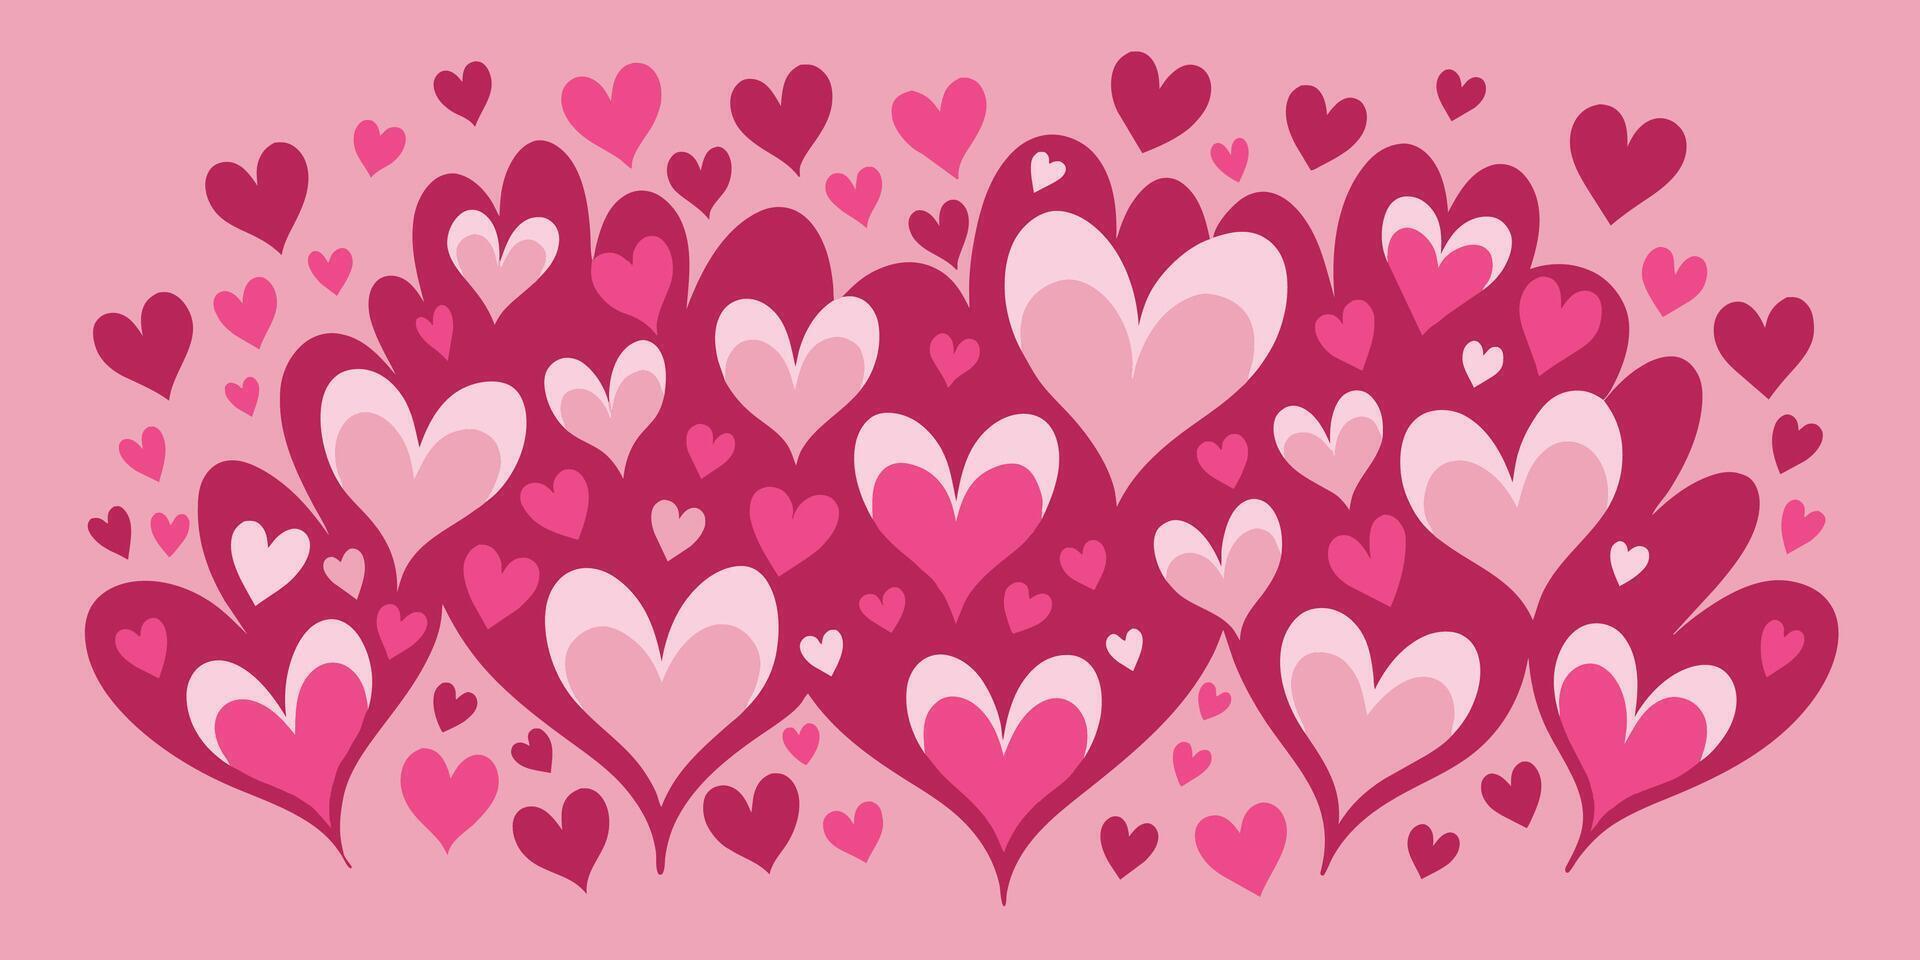 Valentines Day Special An Artistic Assembly of Warm Loving Hearts a vector illustration